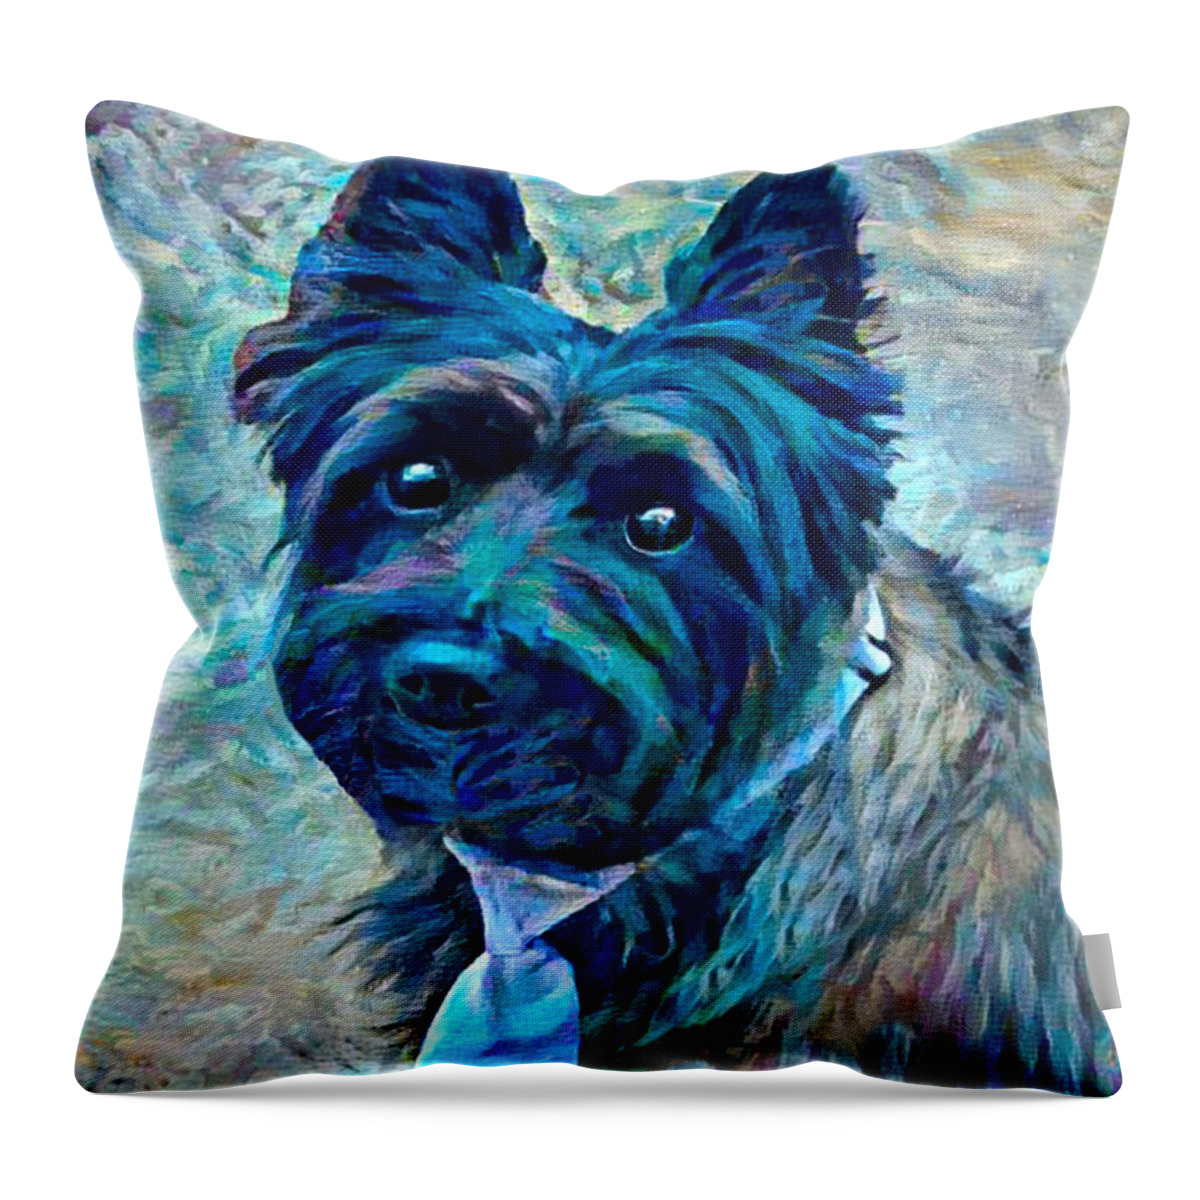 Pet Portrait Throw Pillow featuring the digital art Terry V2 by Artistic Mystic